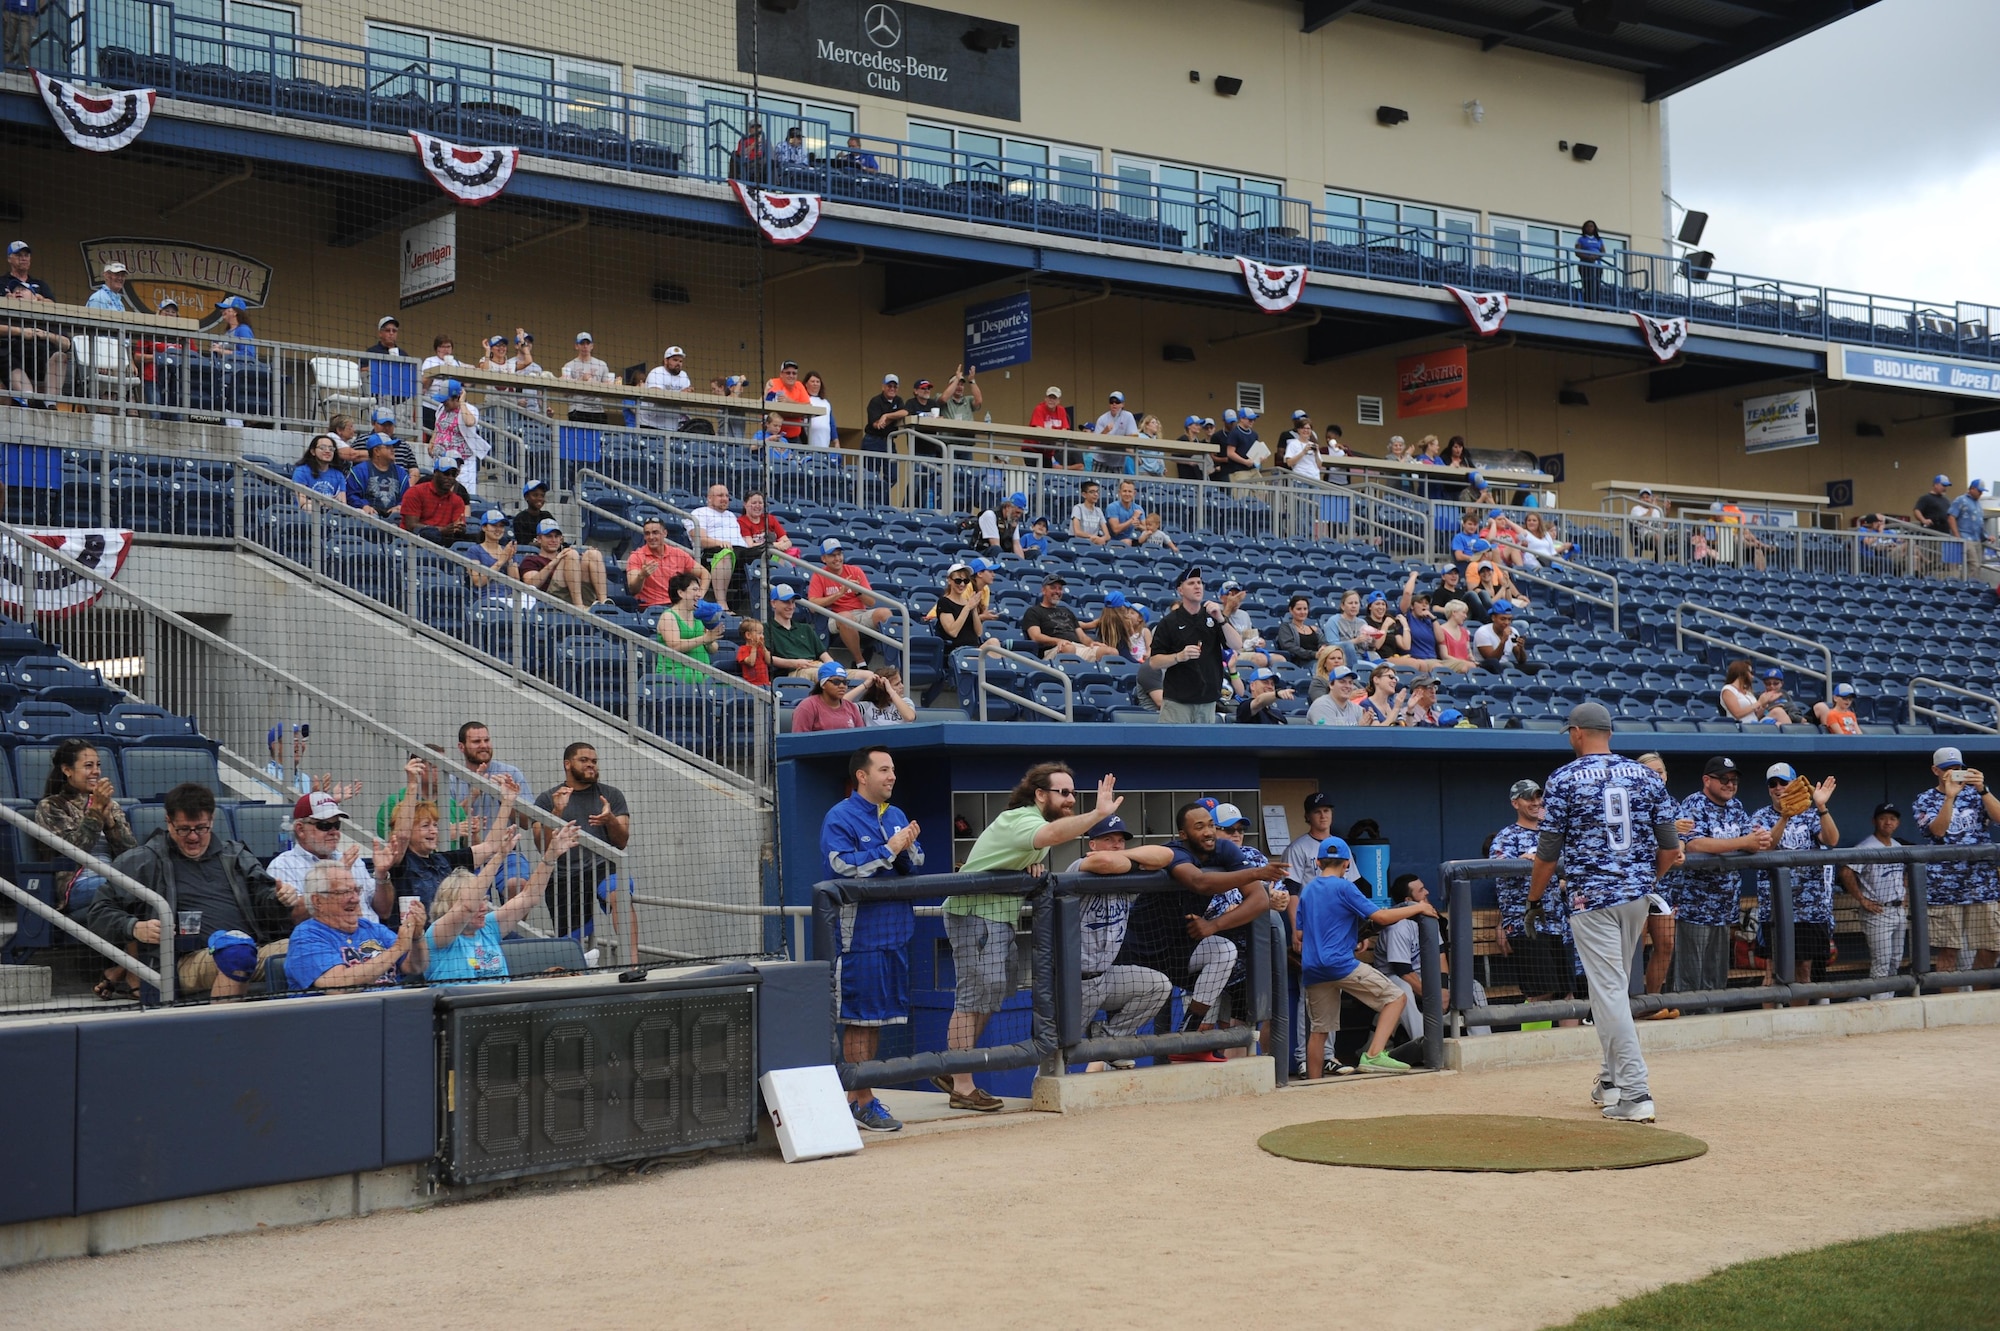 Spectators cheer in the stands during the “Boots versus Badges” softball game at the Biloxi Shuckers MGM Park April 21, 2016, Biloxi, Miss. The game was the kickoff event for the 2016 Special Olympics Mississippi Summer Games, which will be hosted by Keesler Air Force Base, Miss., May 20-21. (U.S. Air Force photo by Kemberly Groue)